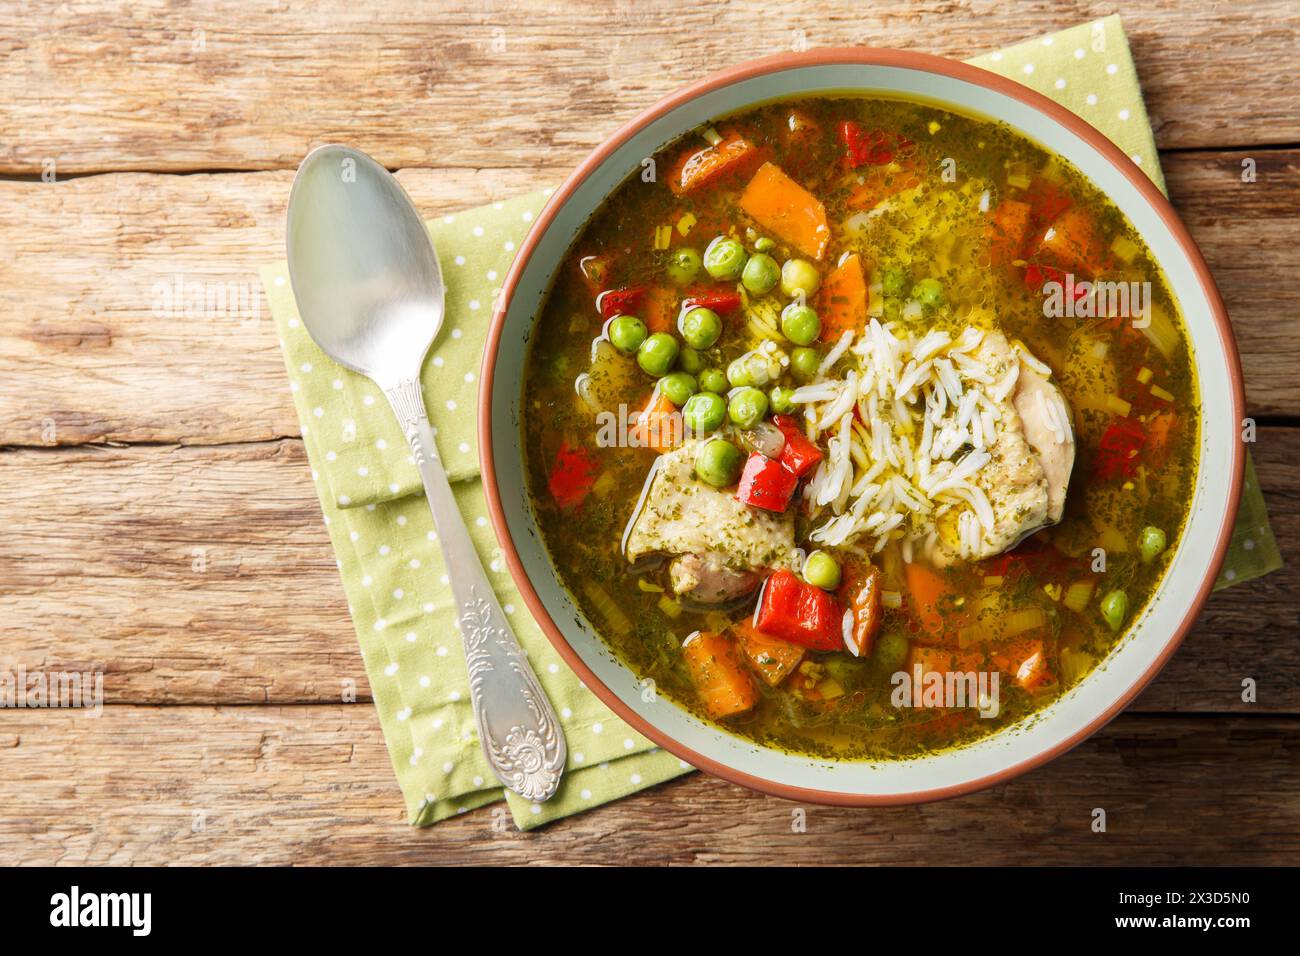 Aguadito de Pollo is a Peruvian cuisine, combining ingredients such as chicken, rice, vegetables and coriander in a tasty broth closeup on the bowl on Stock Photo